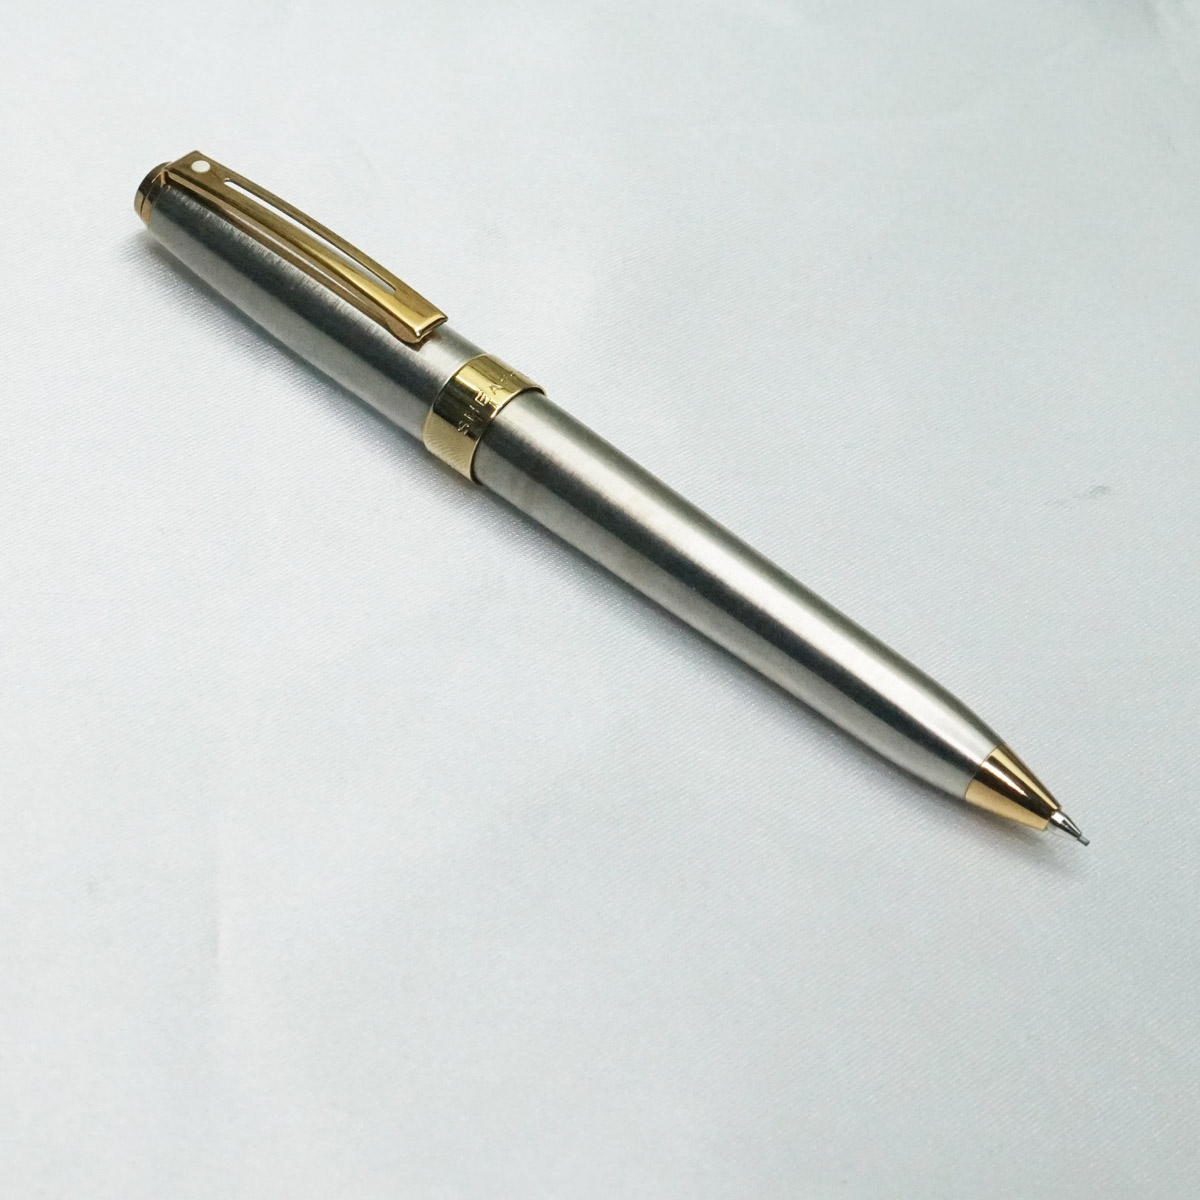 Sheaffer Prelude Silver Color Body and Cap Gold Trims Mechanical Pencil 0.5mm SKU 21811